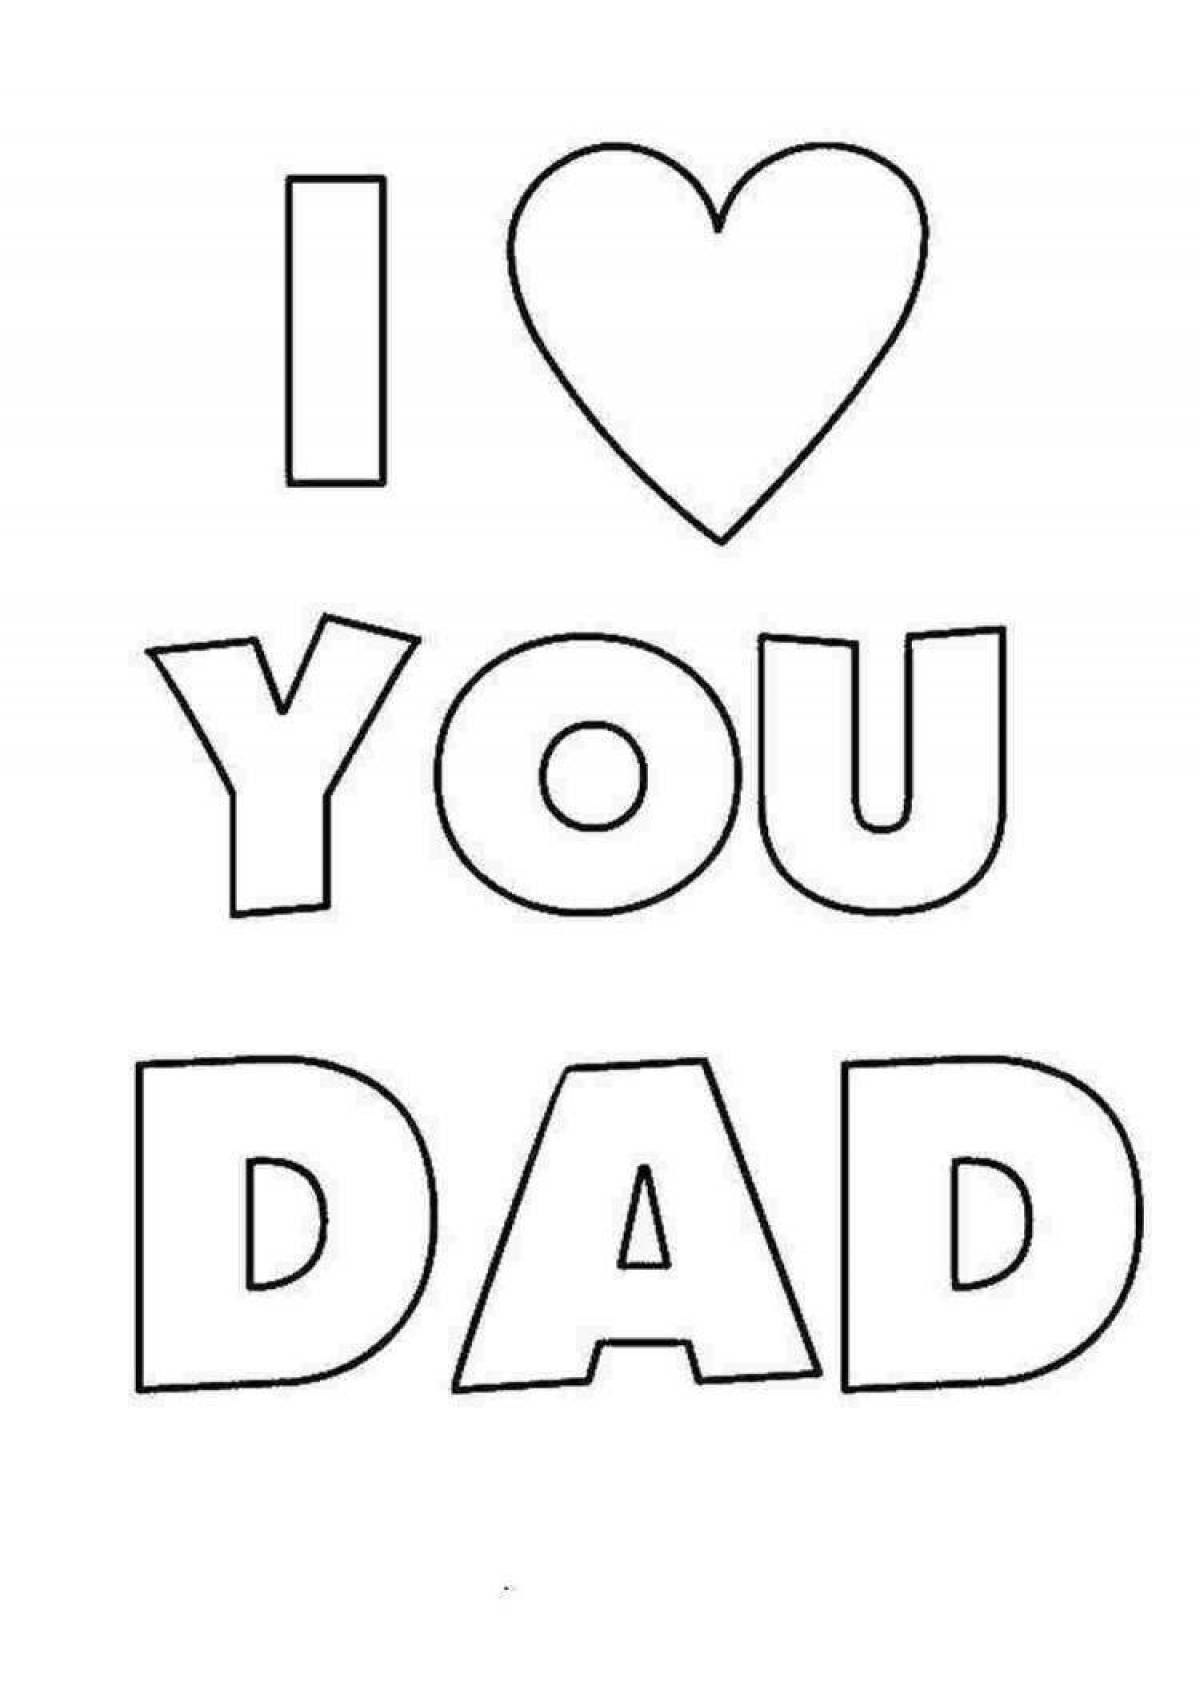 Adorable coloring book for dad for dad's day